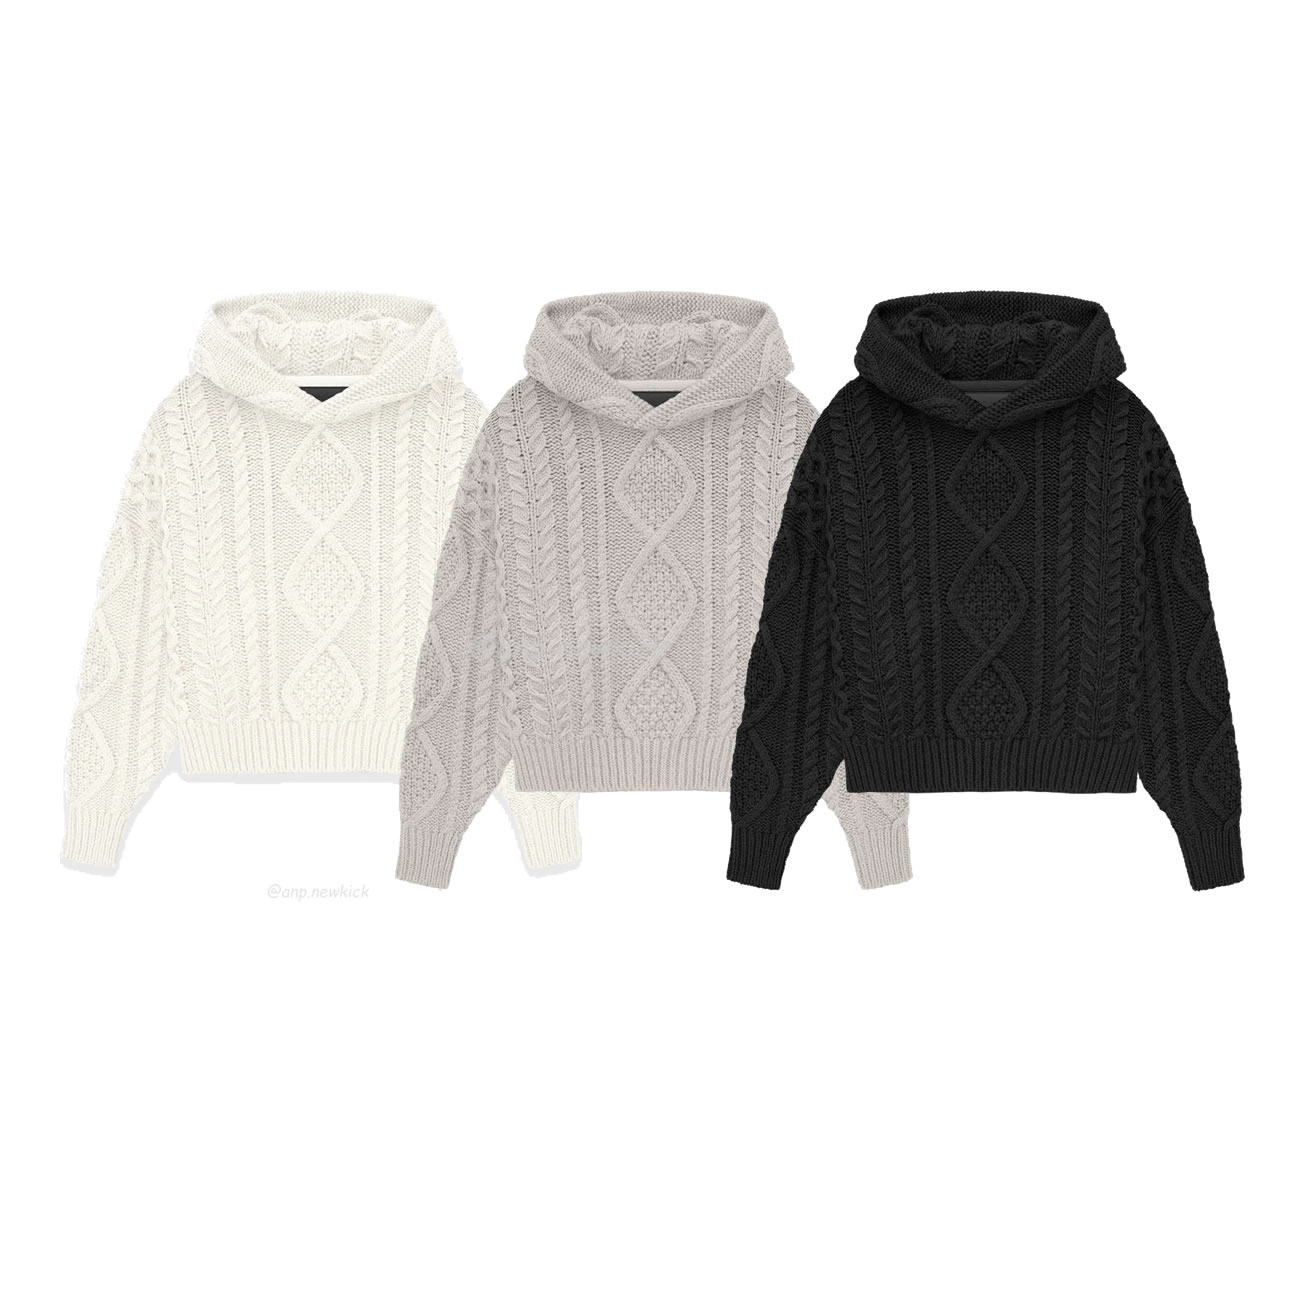 Fear Of God Essentials Fog 23fw New Collection Of Hooded Sweaters In Black Elephant White Beige White S Xl (1) - newkick.org